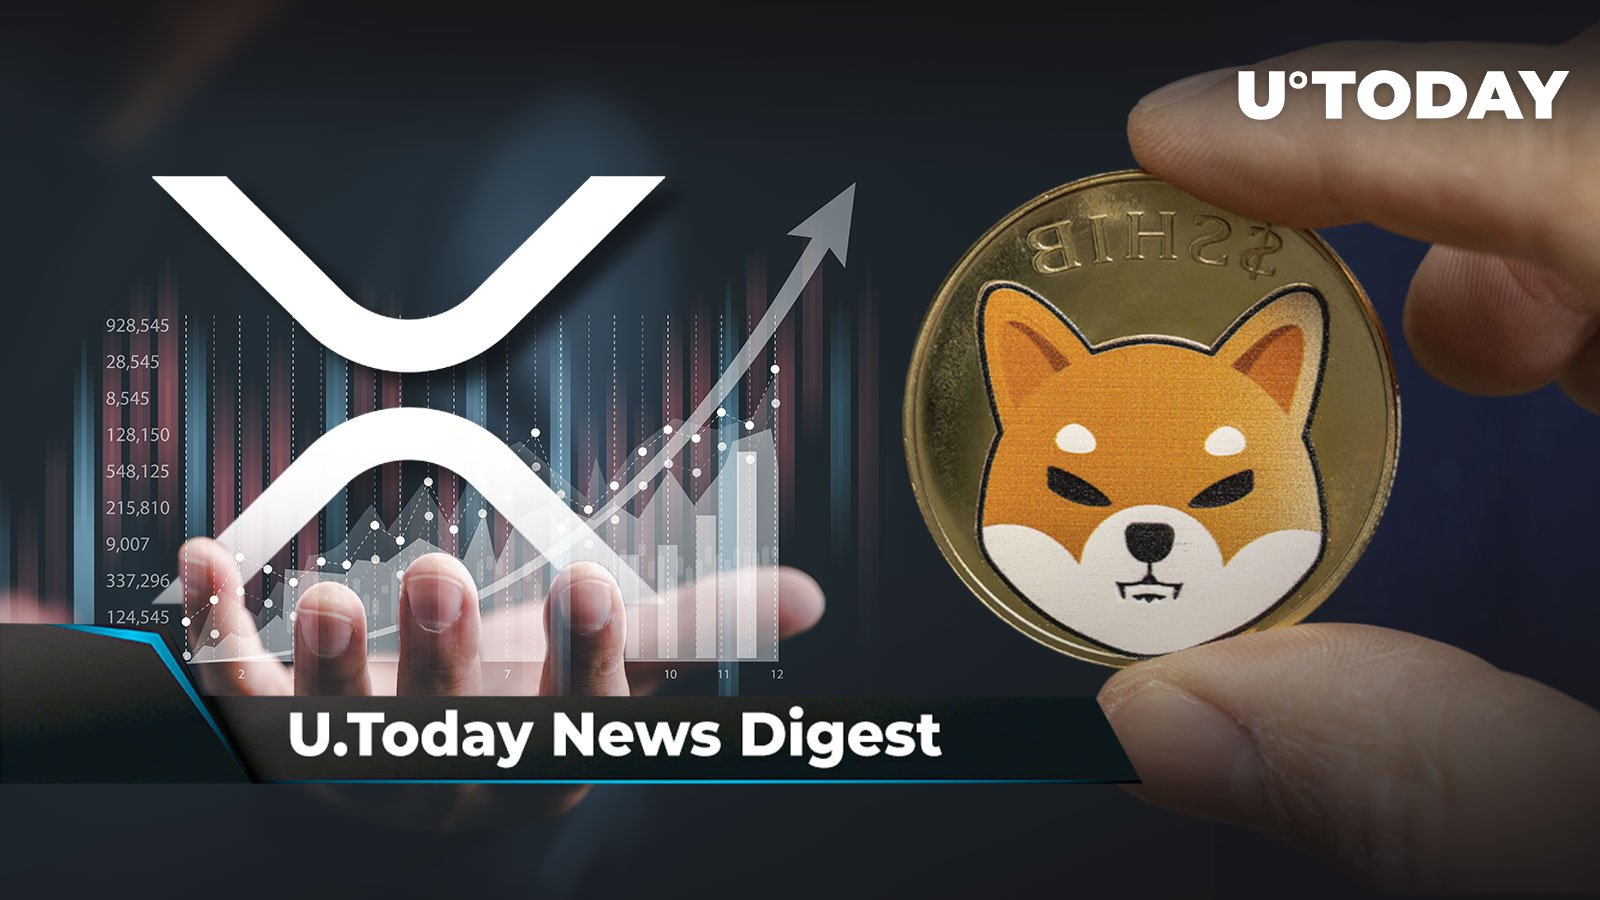 BONE Fee to Send SHIB Goes Down Thousands of Percent, 916 Million XRP Moved by Ripple, Japanese Exchange Posts Positive Feedback on SHIB Listing: Crypto News Digest by U.Today